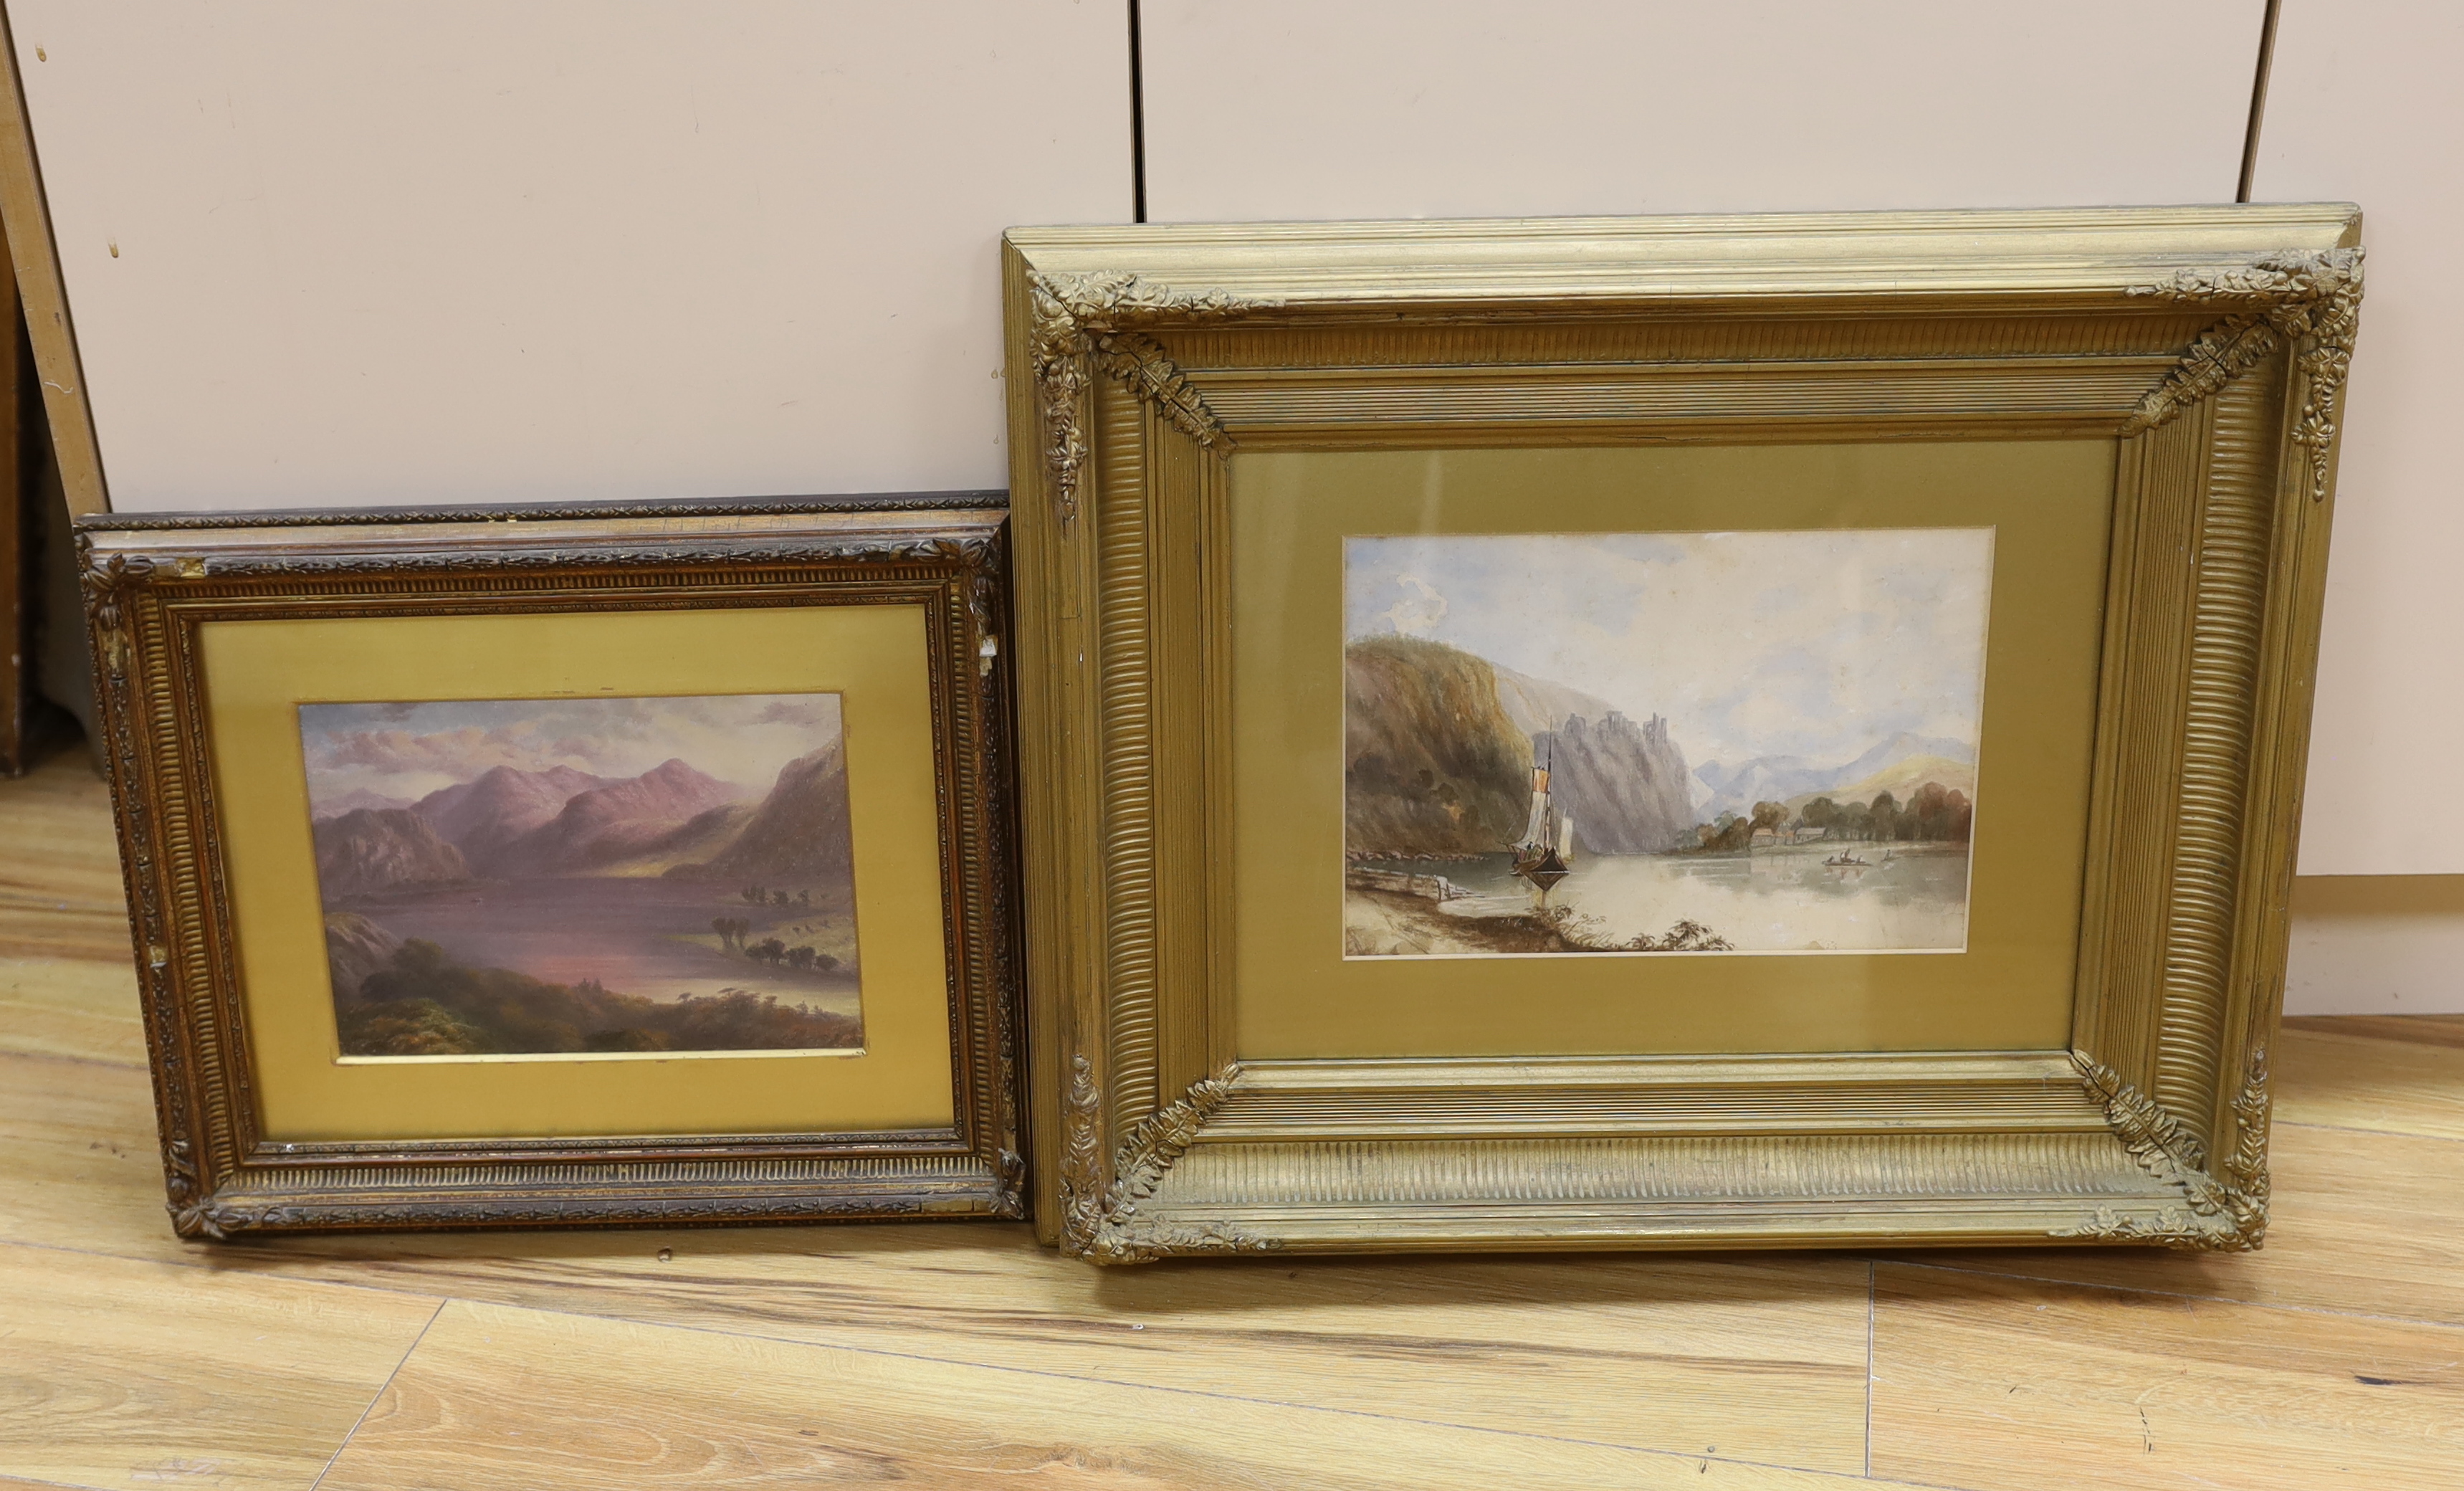 Oil on board, Mountainous lakeside landscape, together with a similar watercolour, each unsigned, largest 20 x 29cm, ornate gilt framed